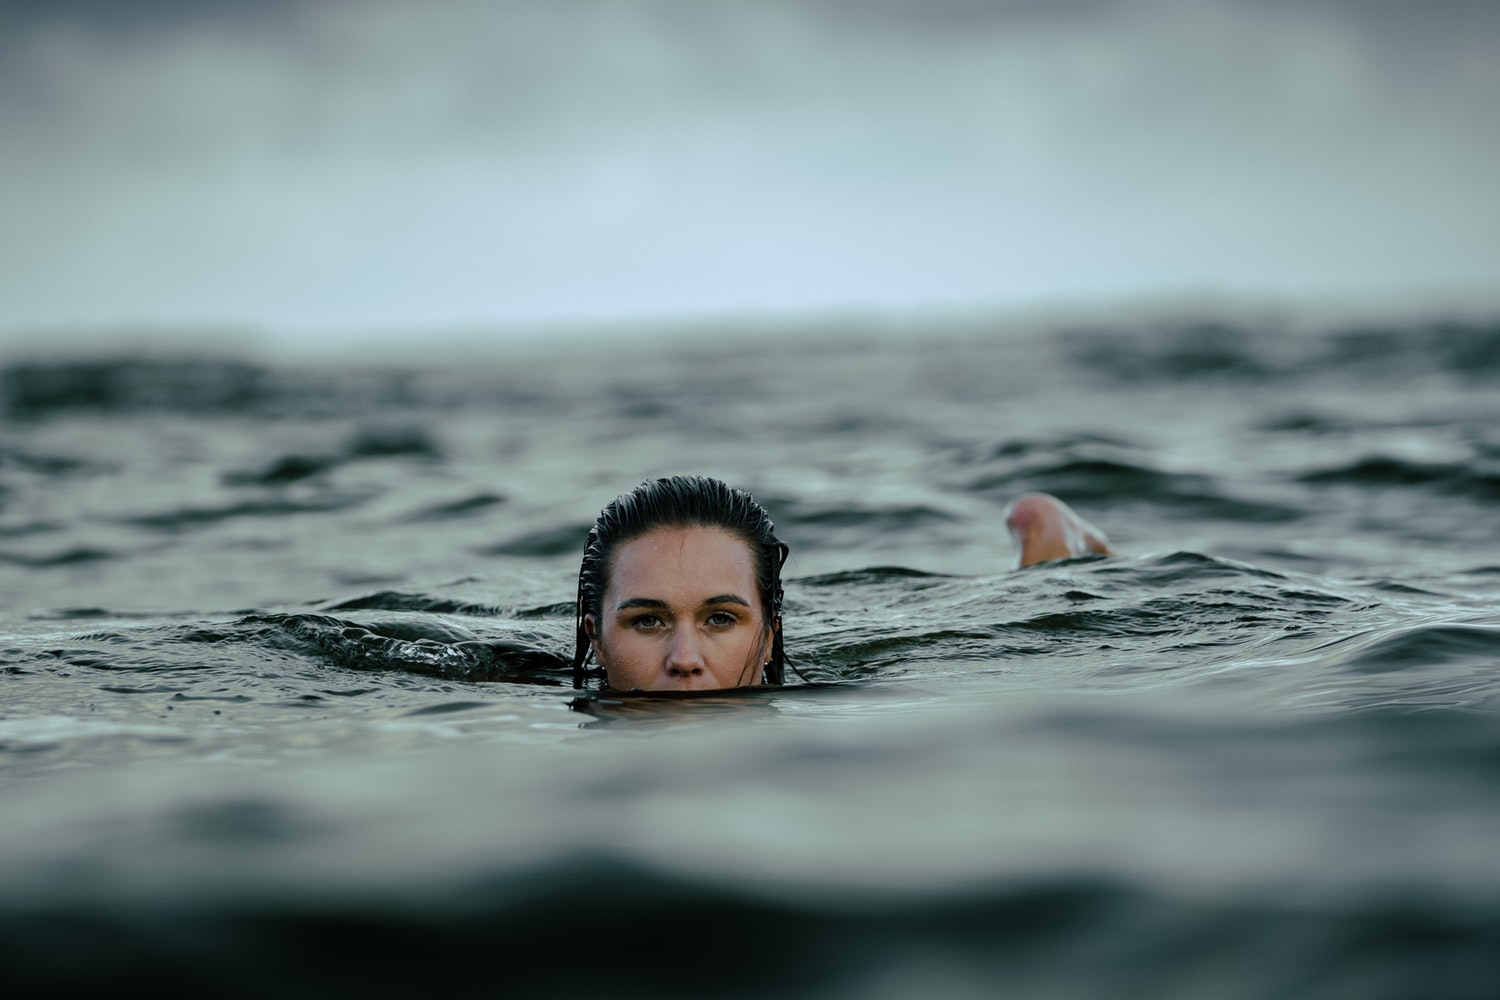 A woman&#039;s face trying to stay afloat in the middle of the ocean